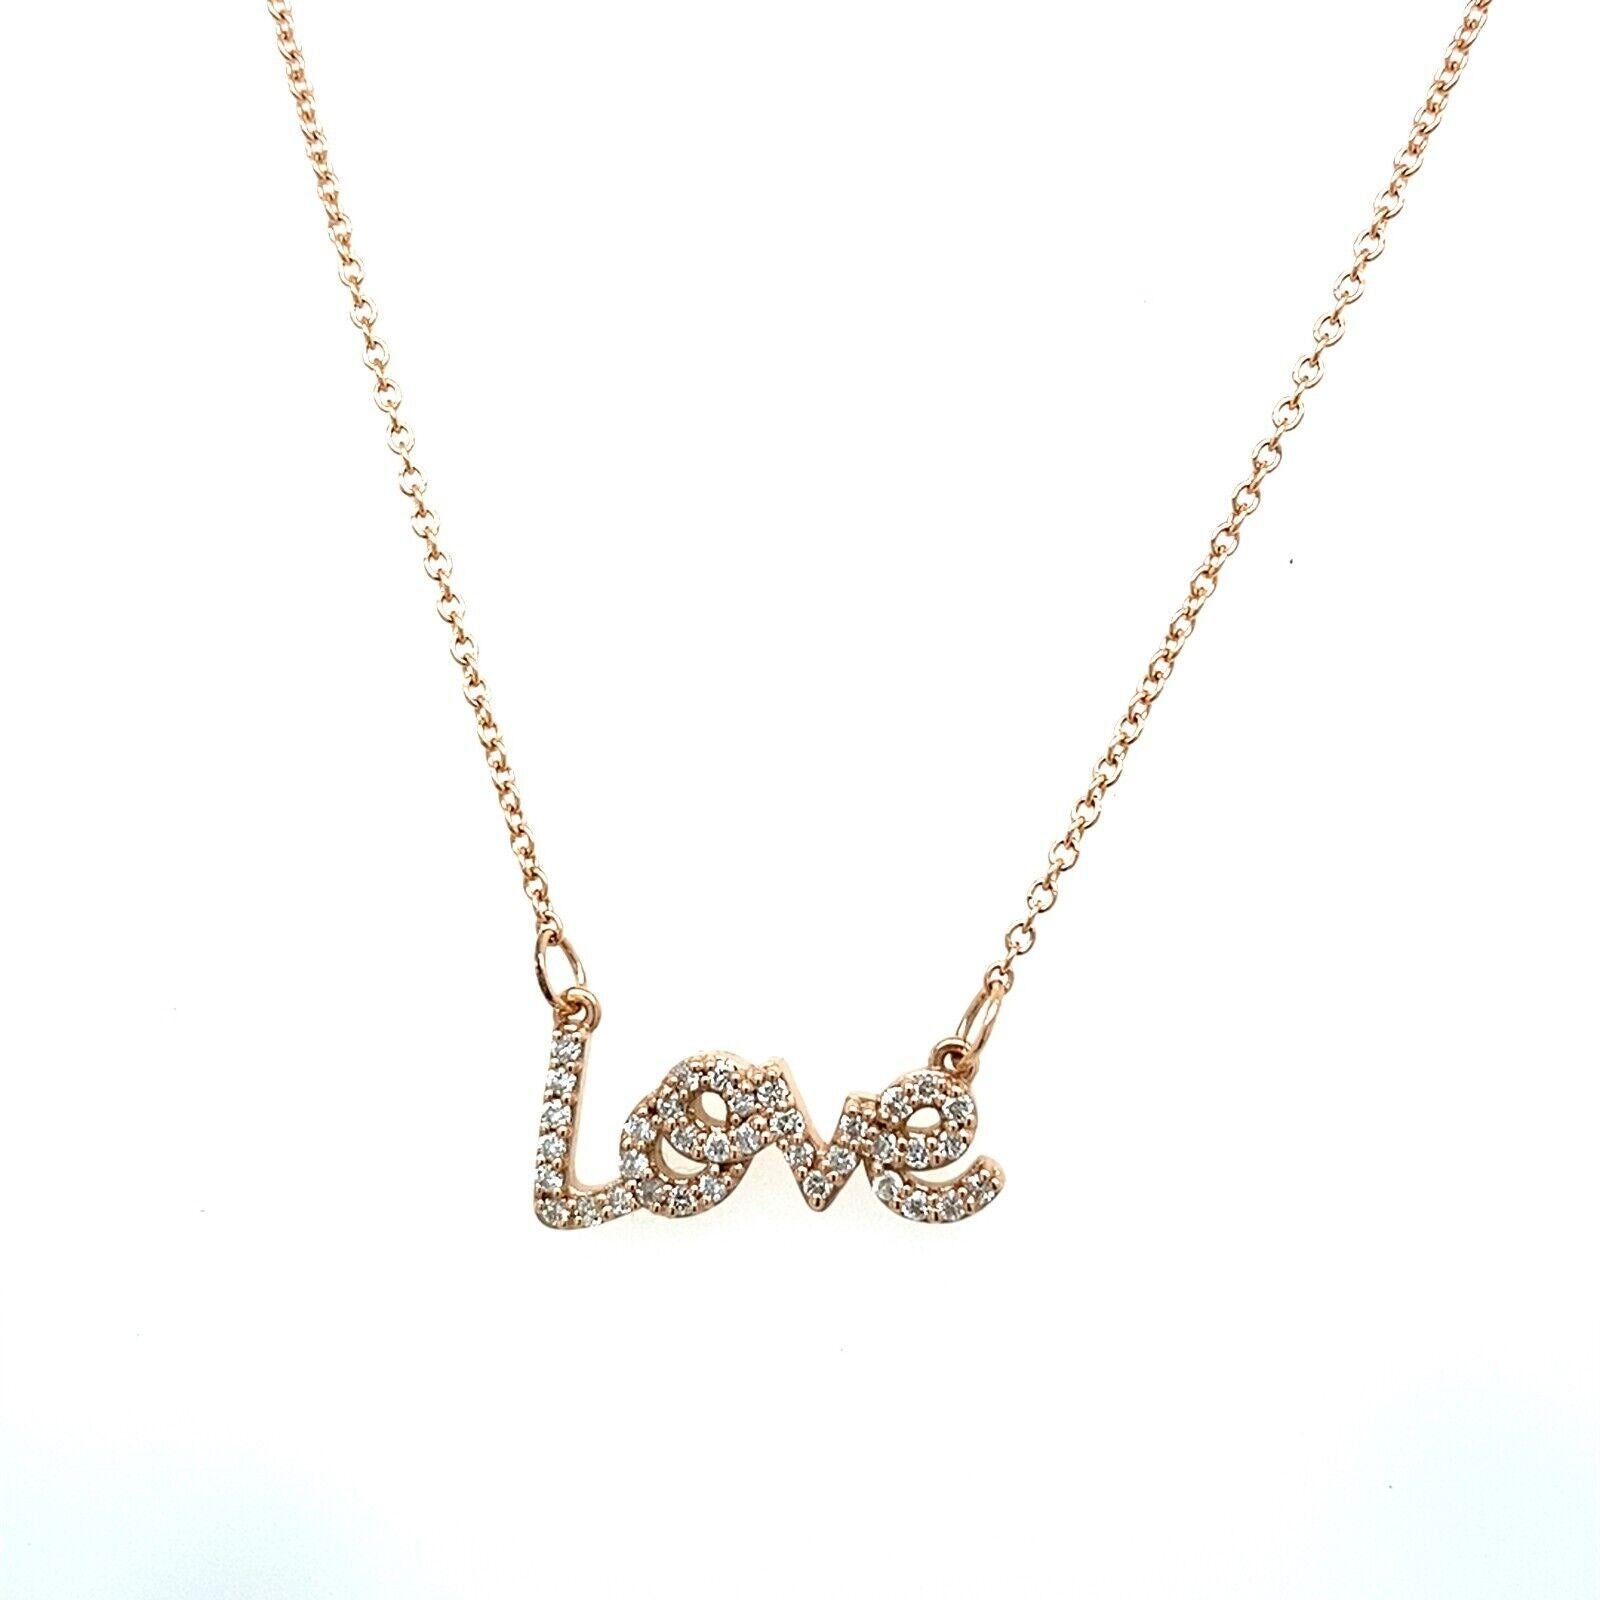 Set with 0.23ct of round diamonds, this LOVE necklace is a gift of love for someone special, or for yourself. This delicate necklace features a 9ct rose gold chain that can be worn on 16